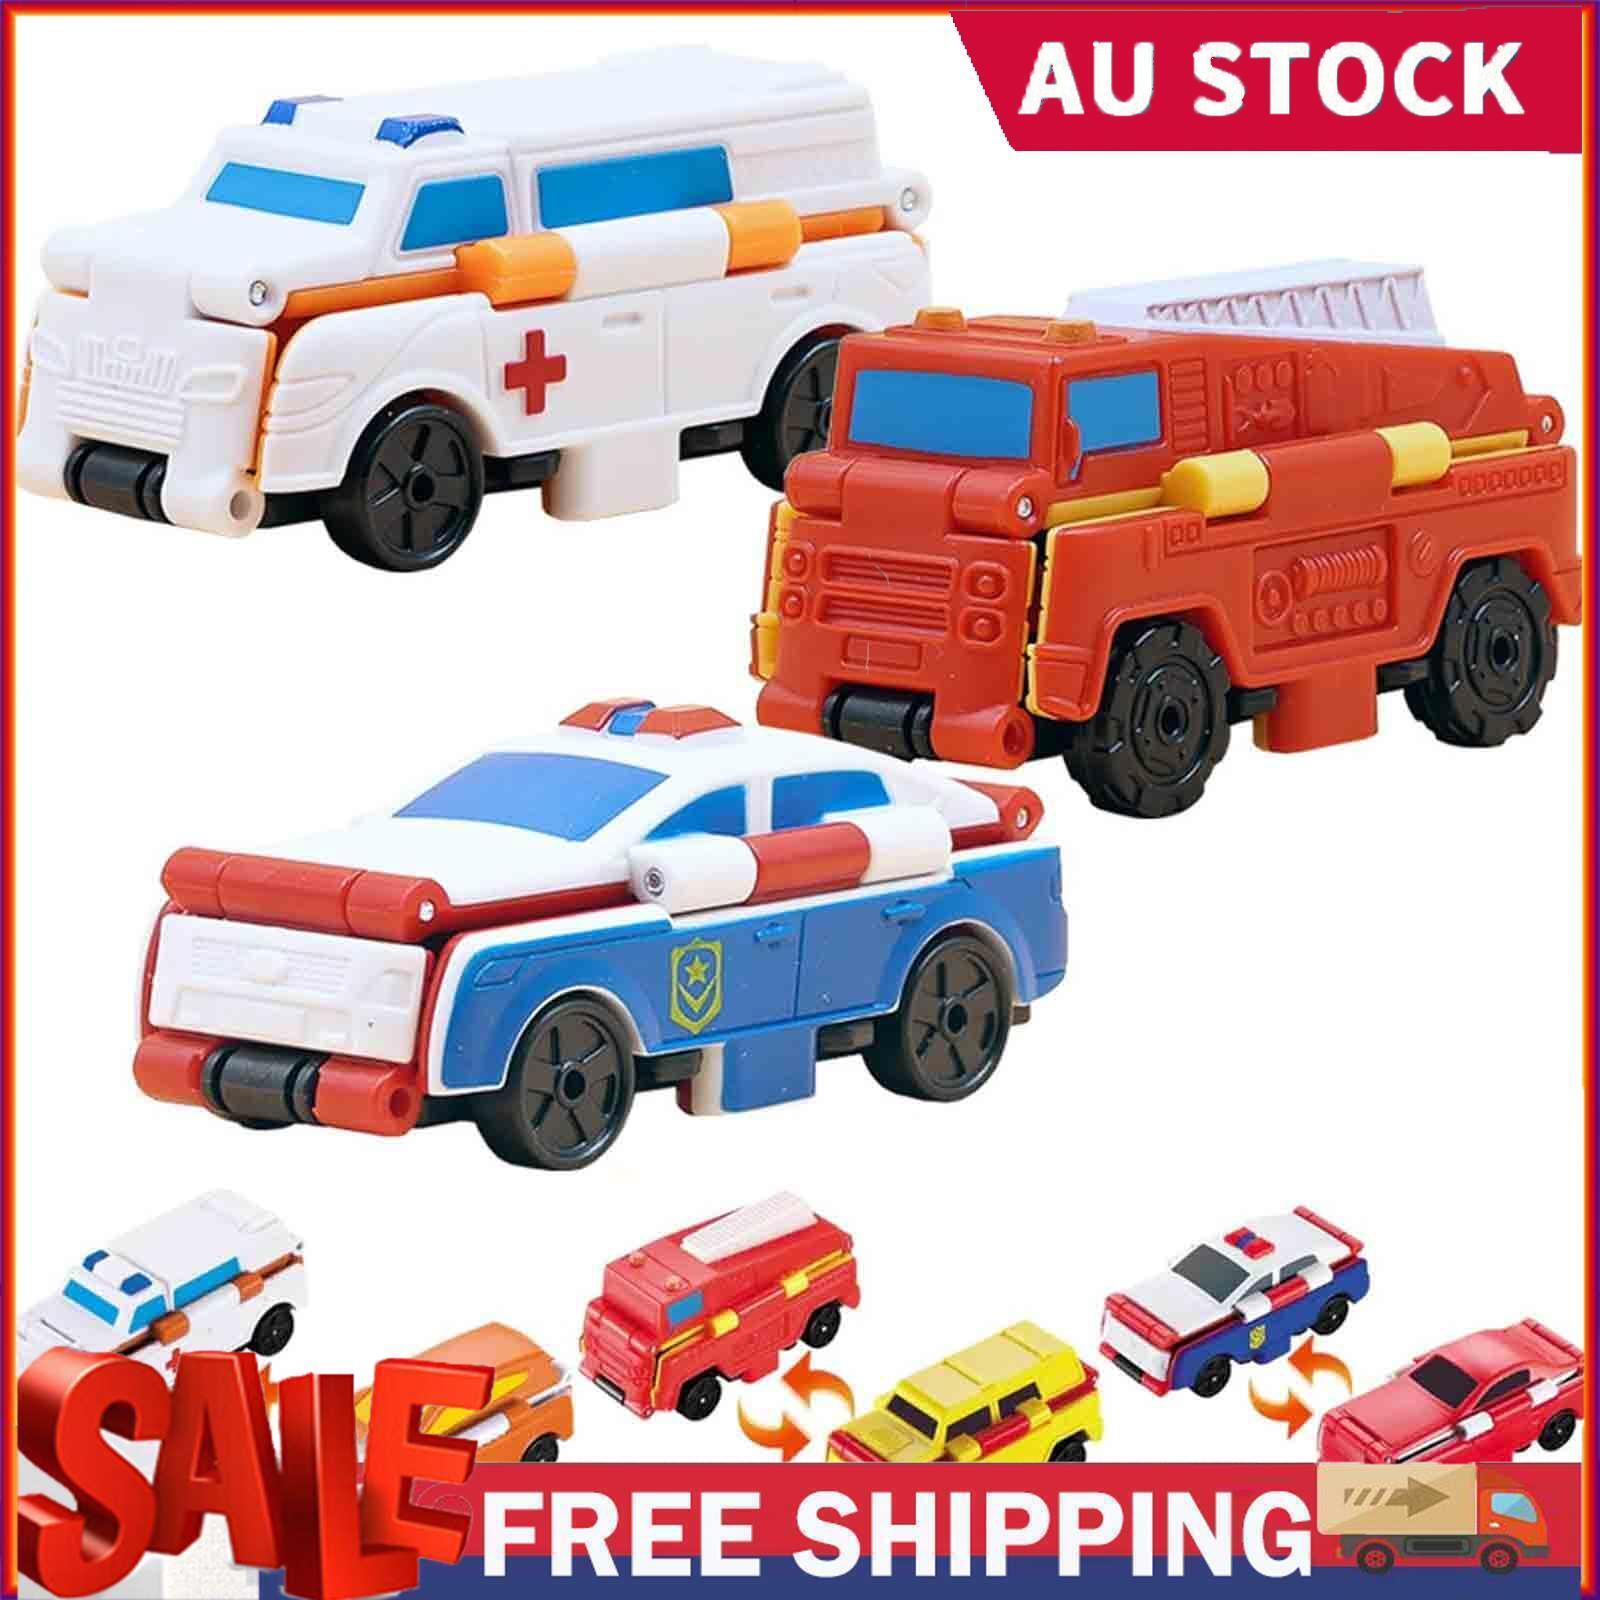 Transformable Cars Emergency Vehicles Set of 3 - Mini Deformation Toy Cars